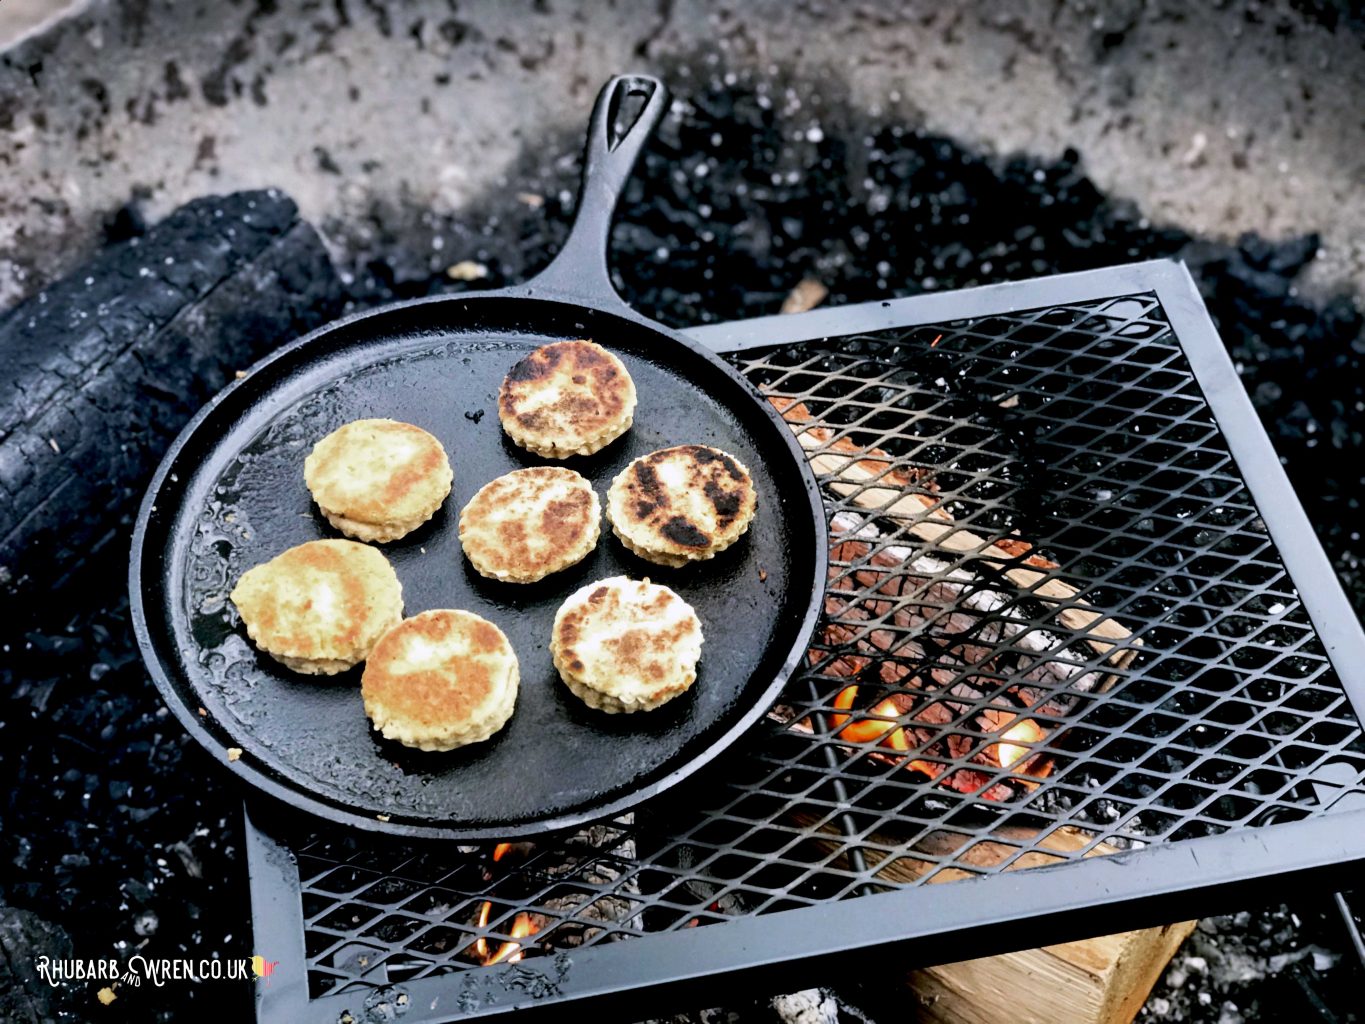 A cast iron pan full of Welsh cakes, cooking over a campfire